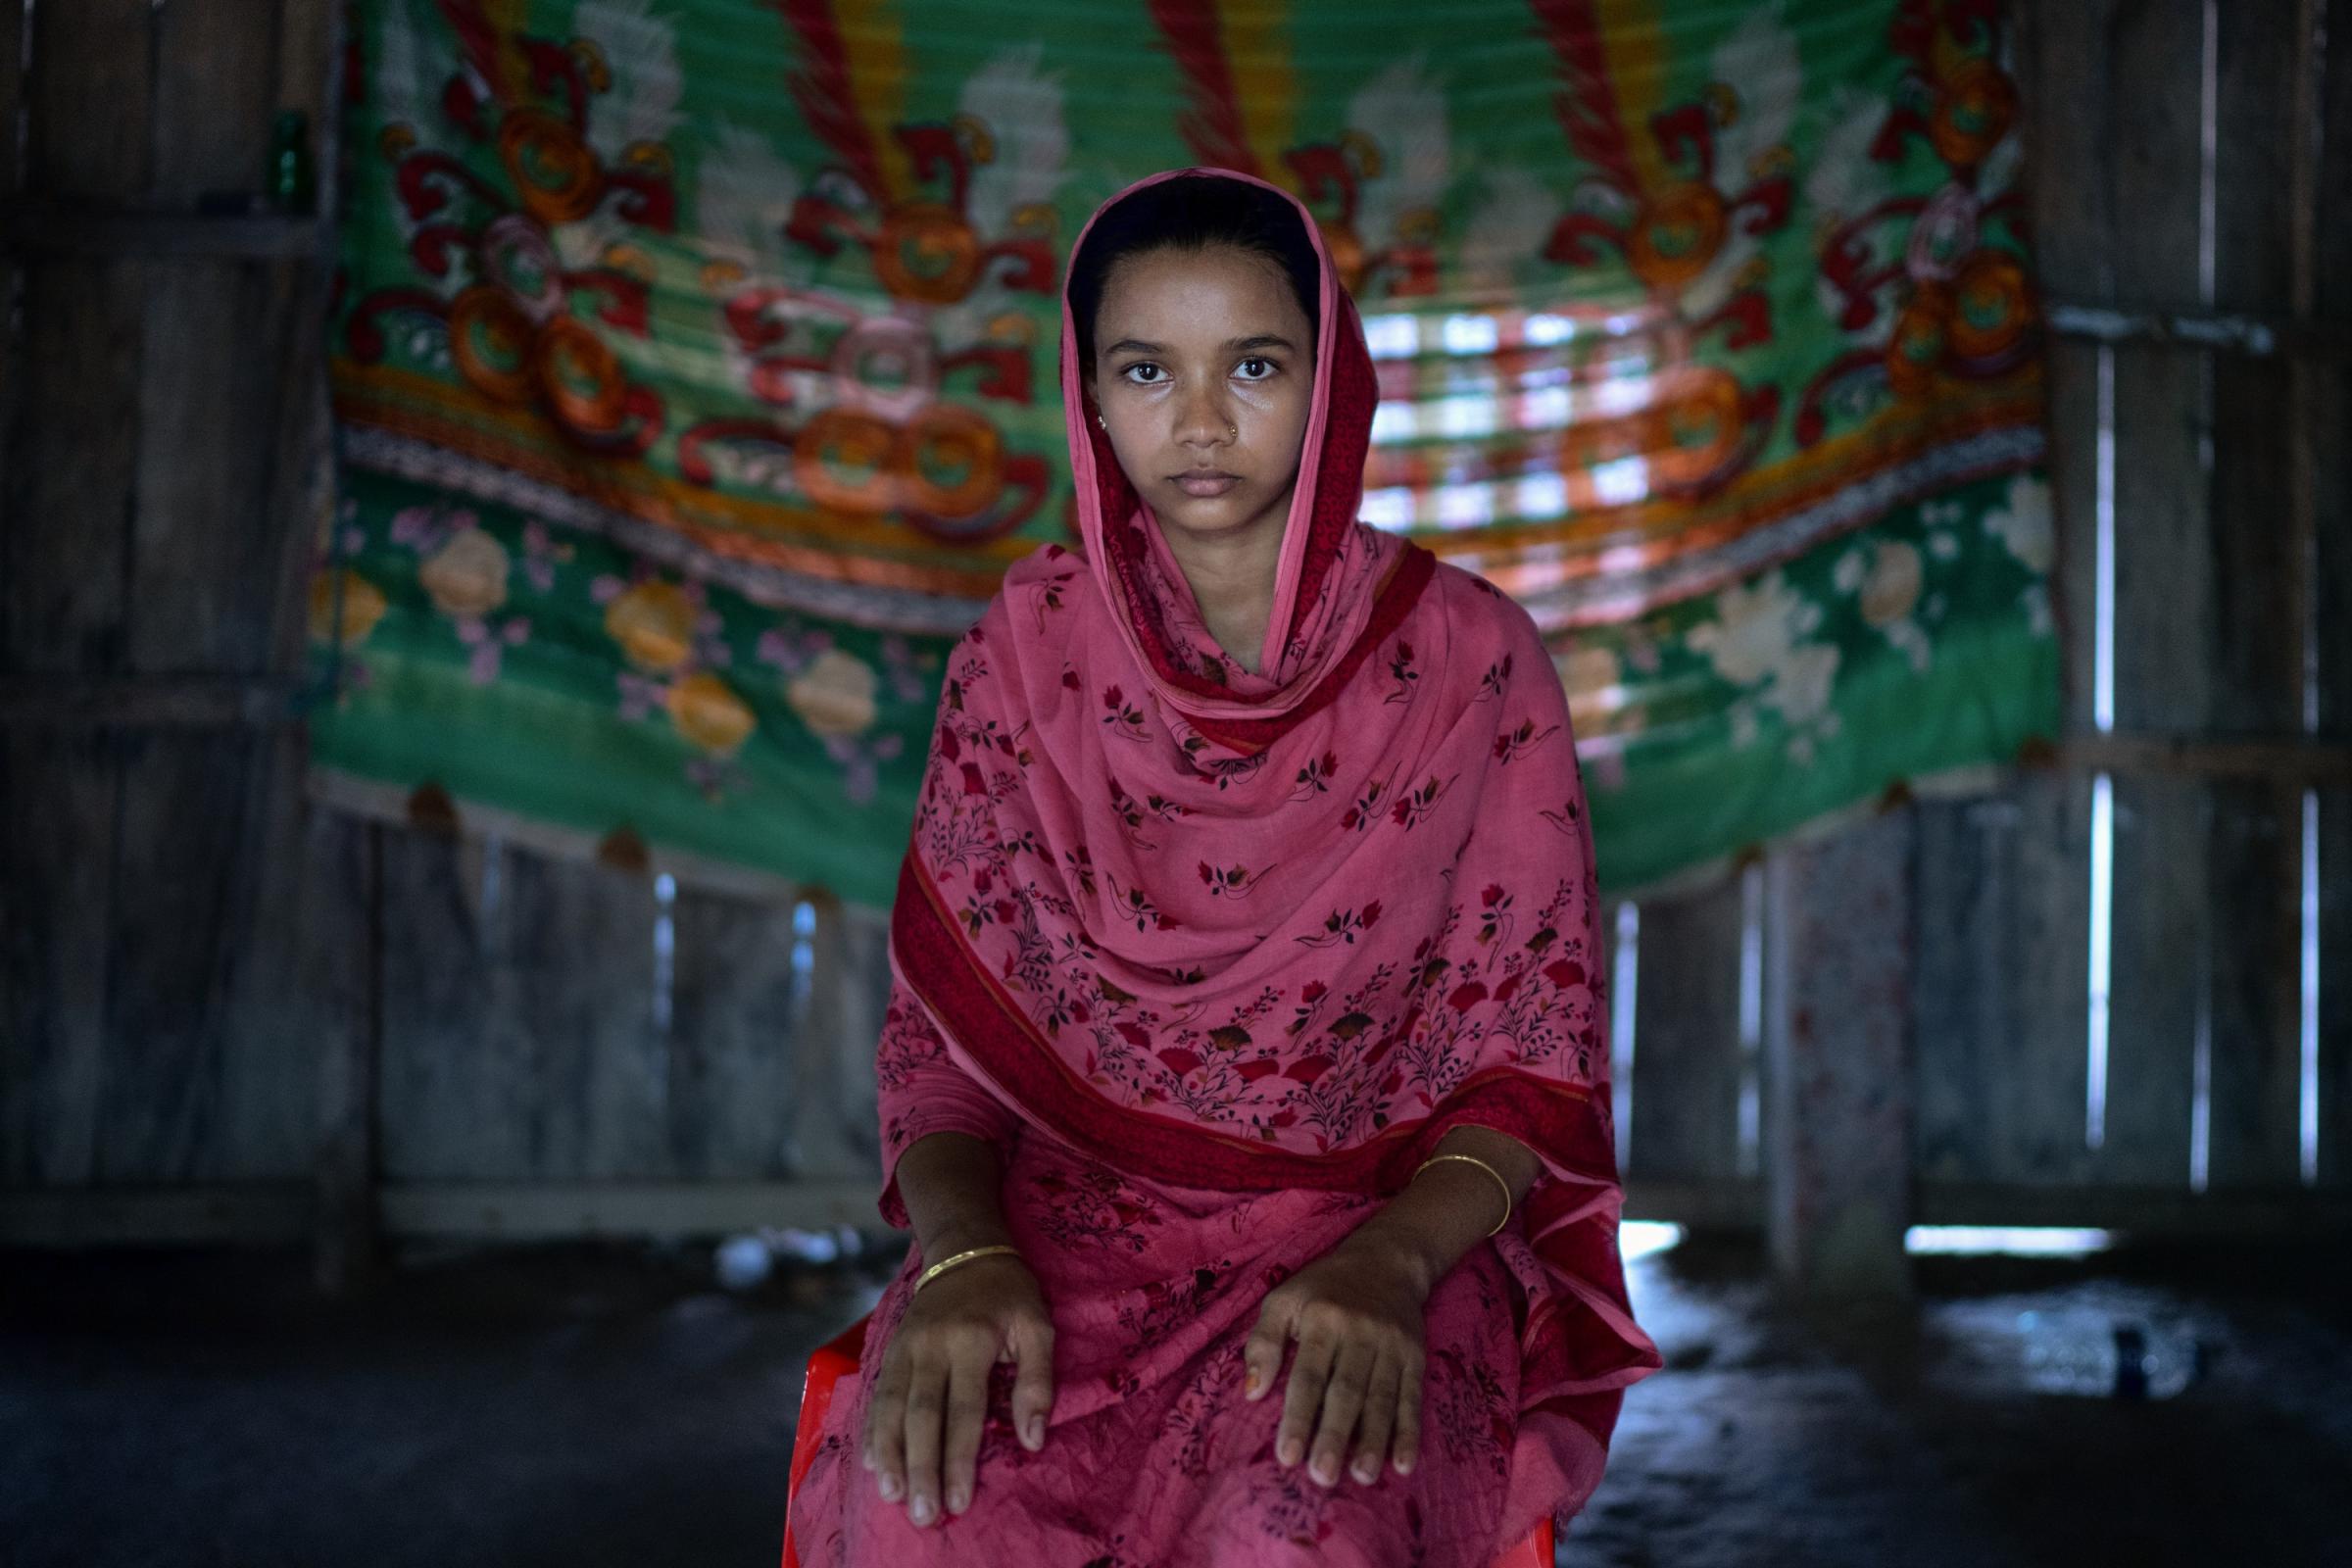 Child marriage in Bangladesh - Marufa Khatun, 14, recetly gave birth. She was married at...